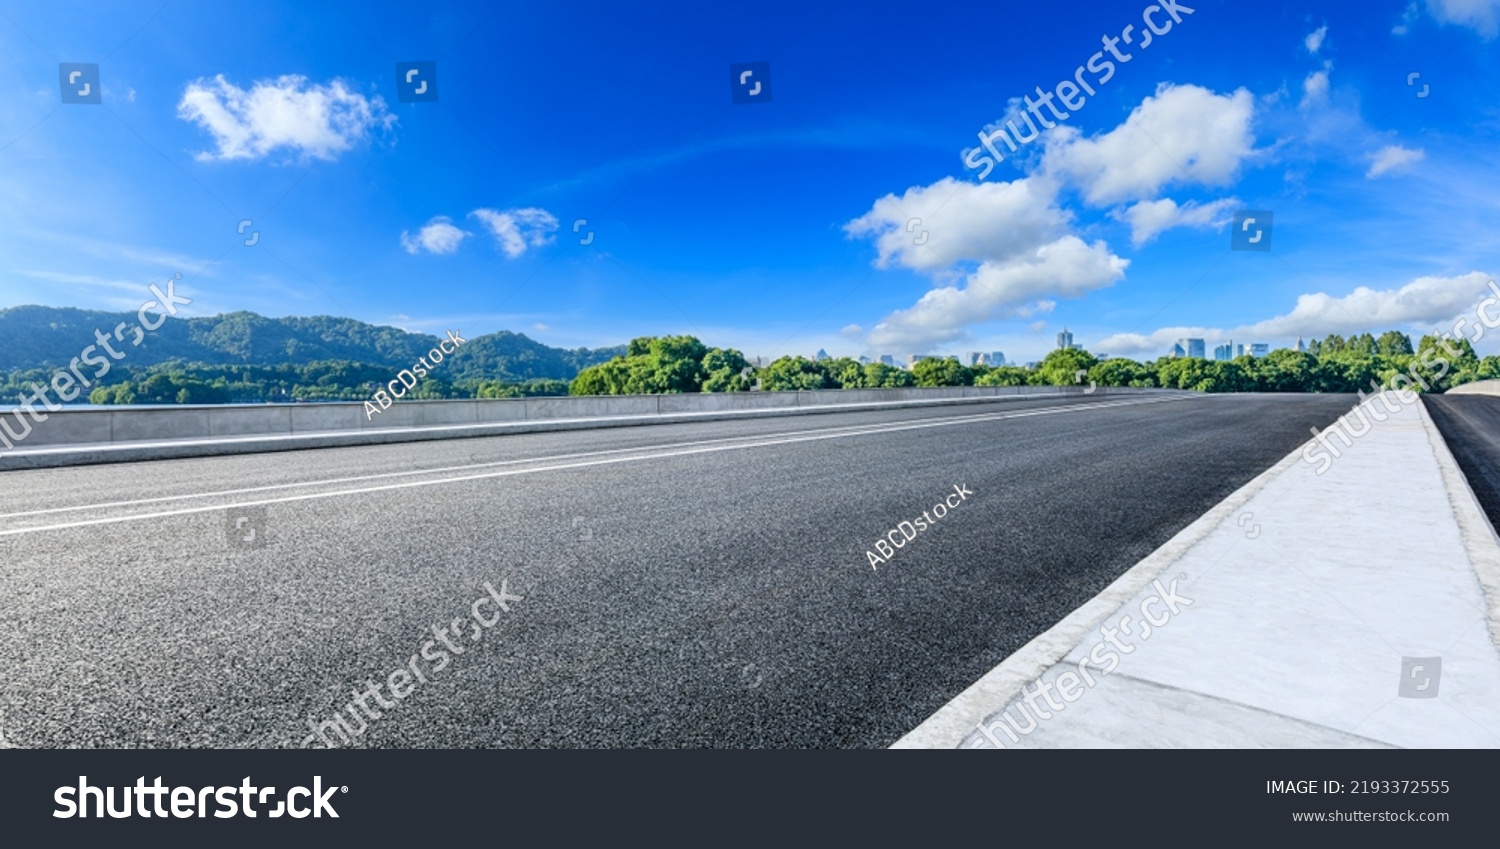 Asphalt road and mountain with city skyline scenery #2193372555